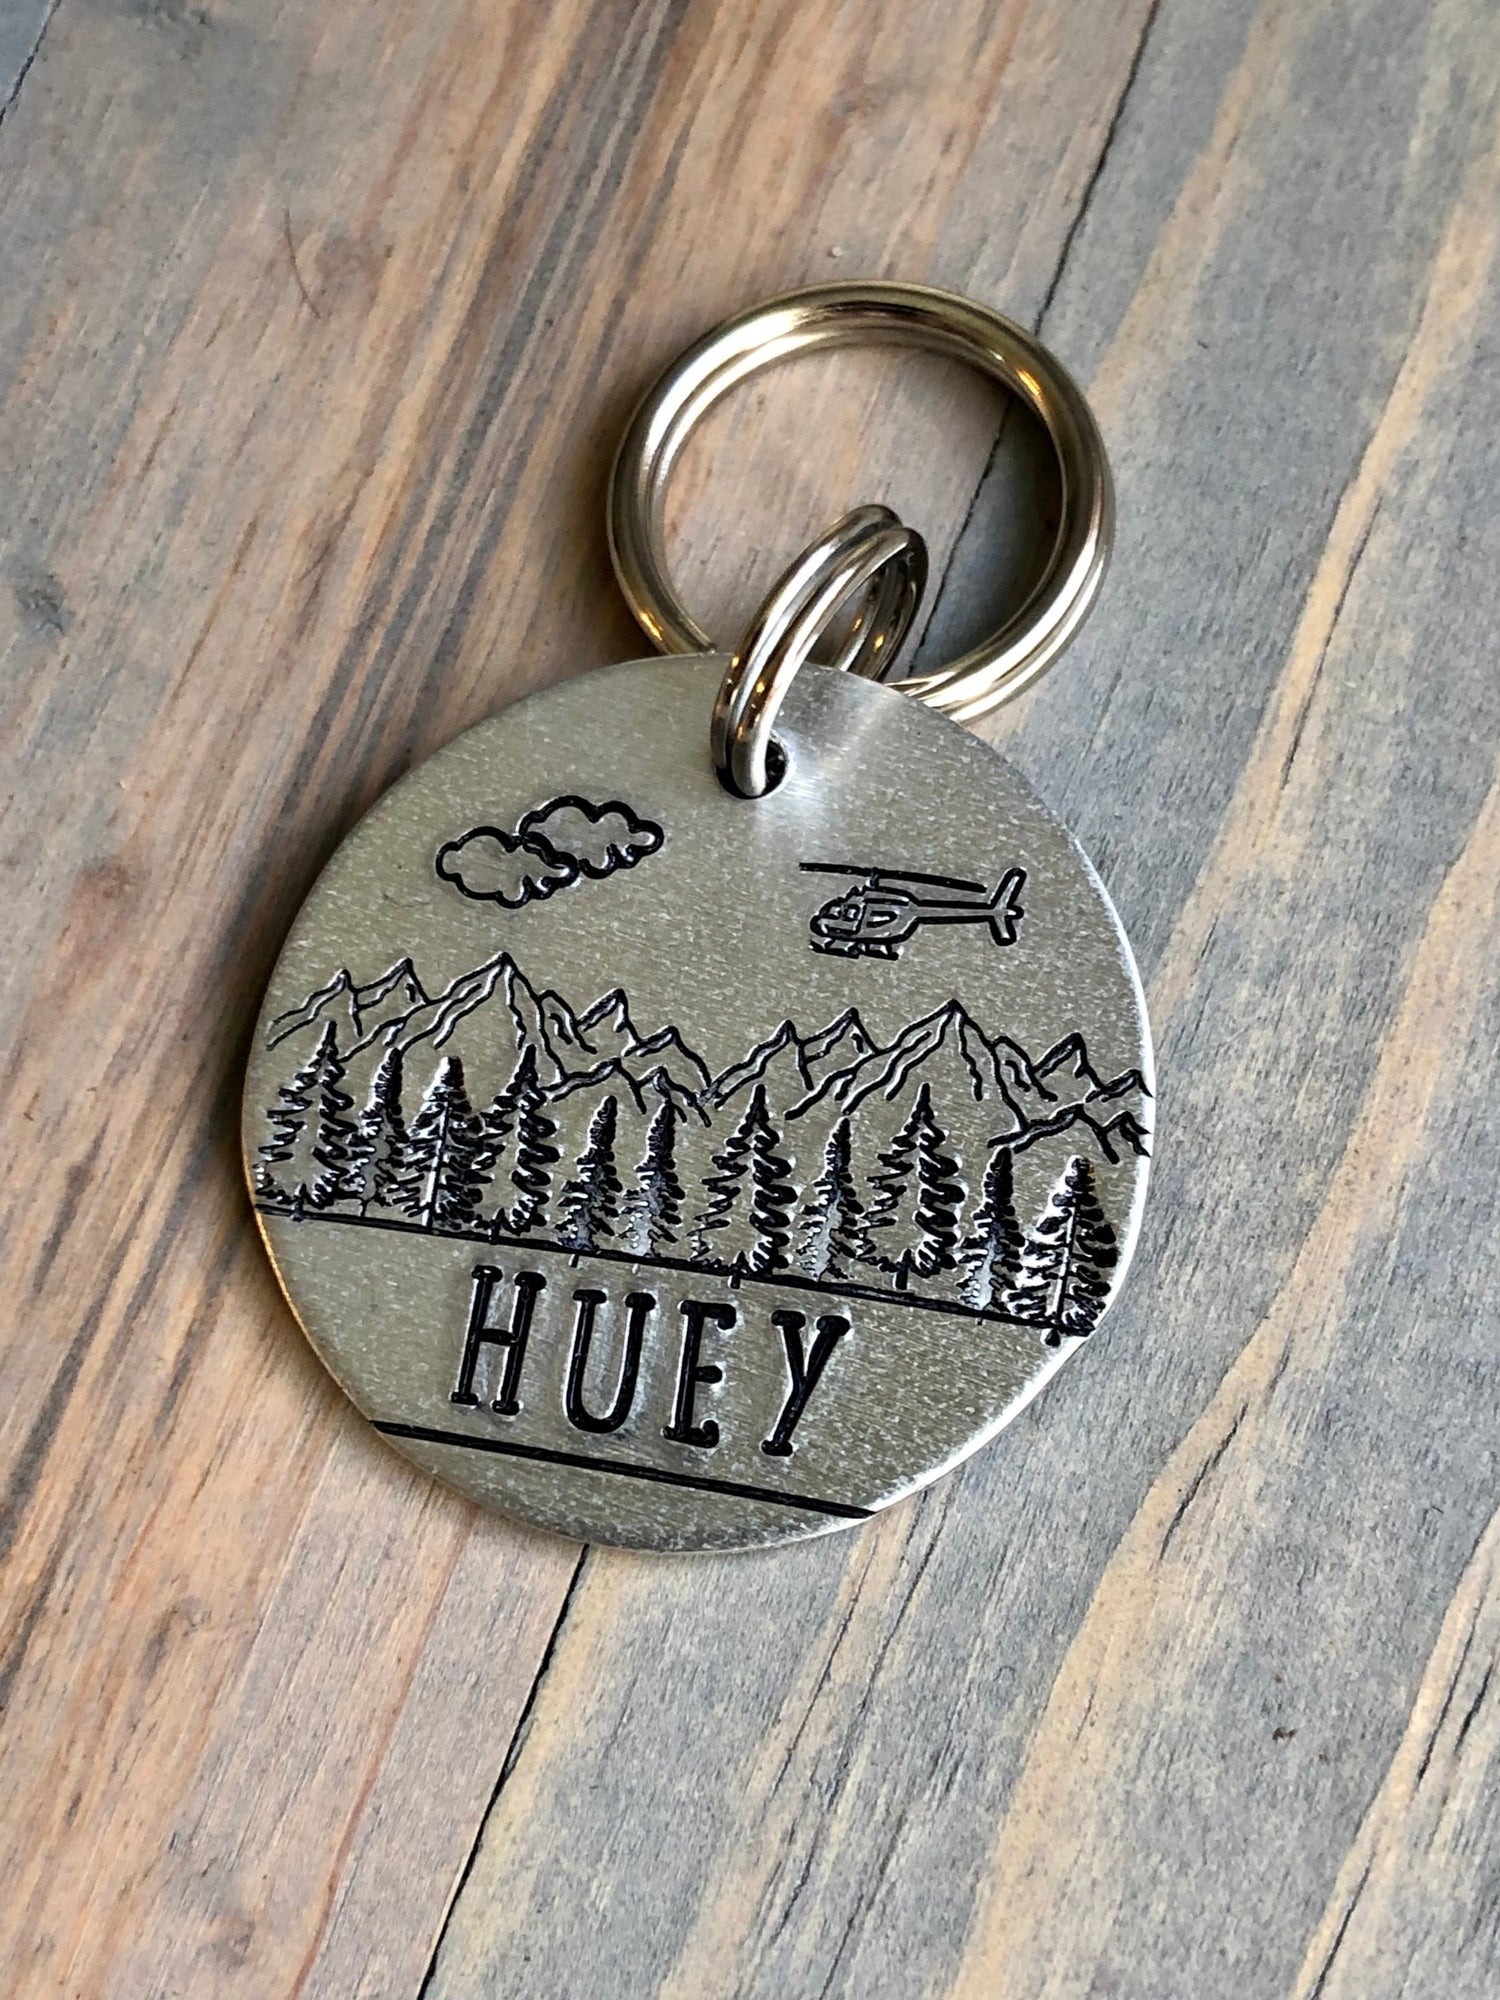 Name Tag for Dog with Helicopter, Hand Stamped Pet ID Tag, Huey, Personalized Dog Tag for Dog, Mountains, Trees, Chopper, Seahawk, Apache